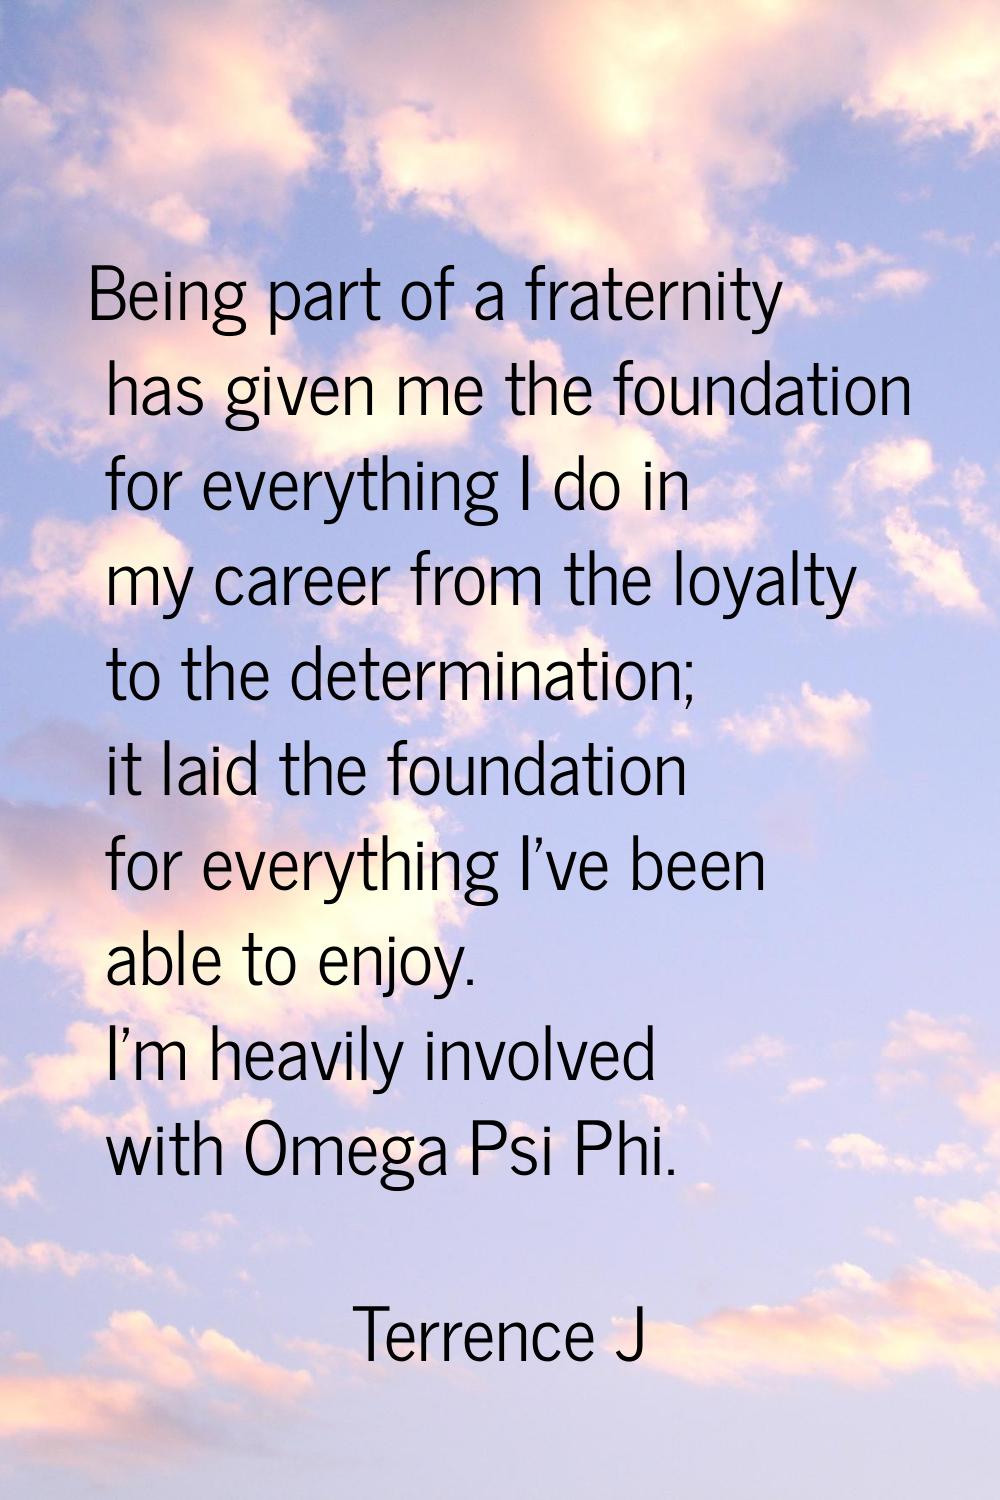 Being part of a fraternity has given me the foundation for everything I do in my career from the lo